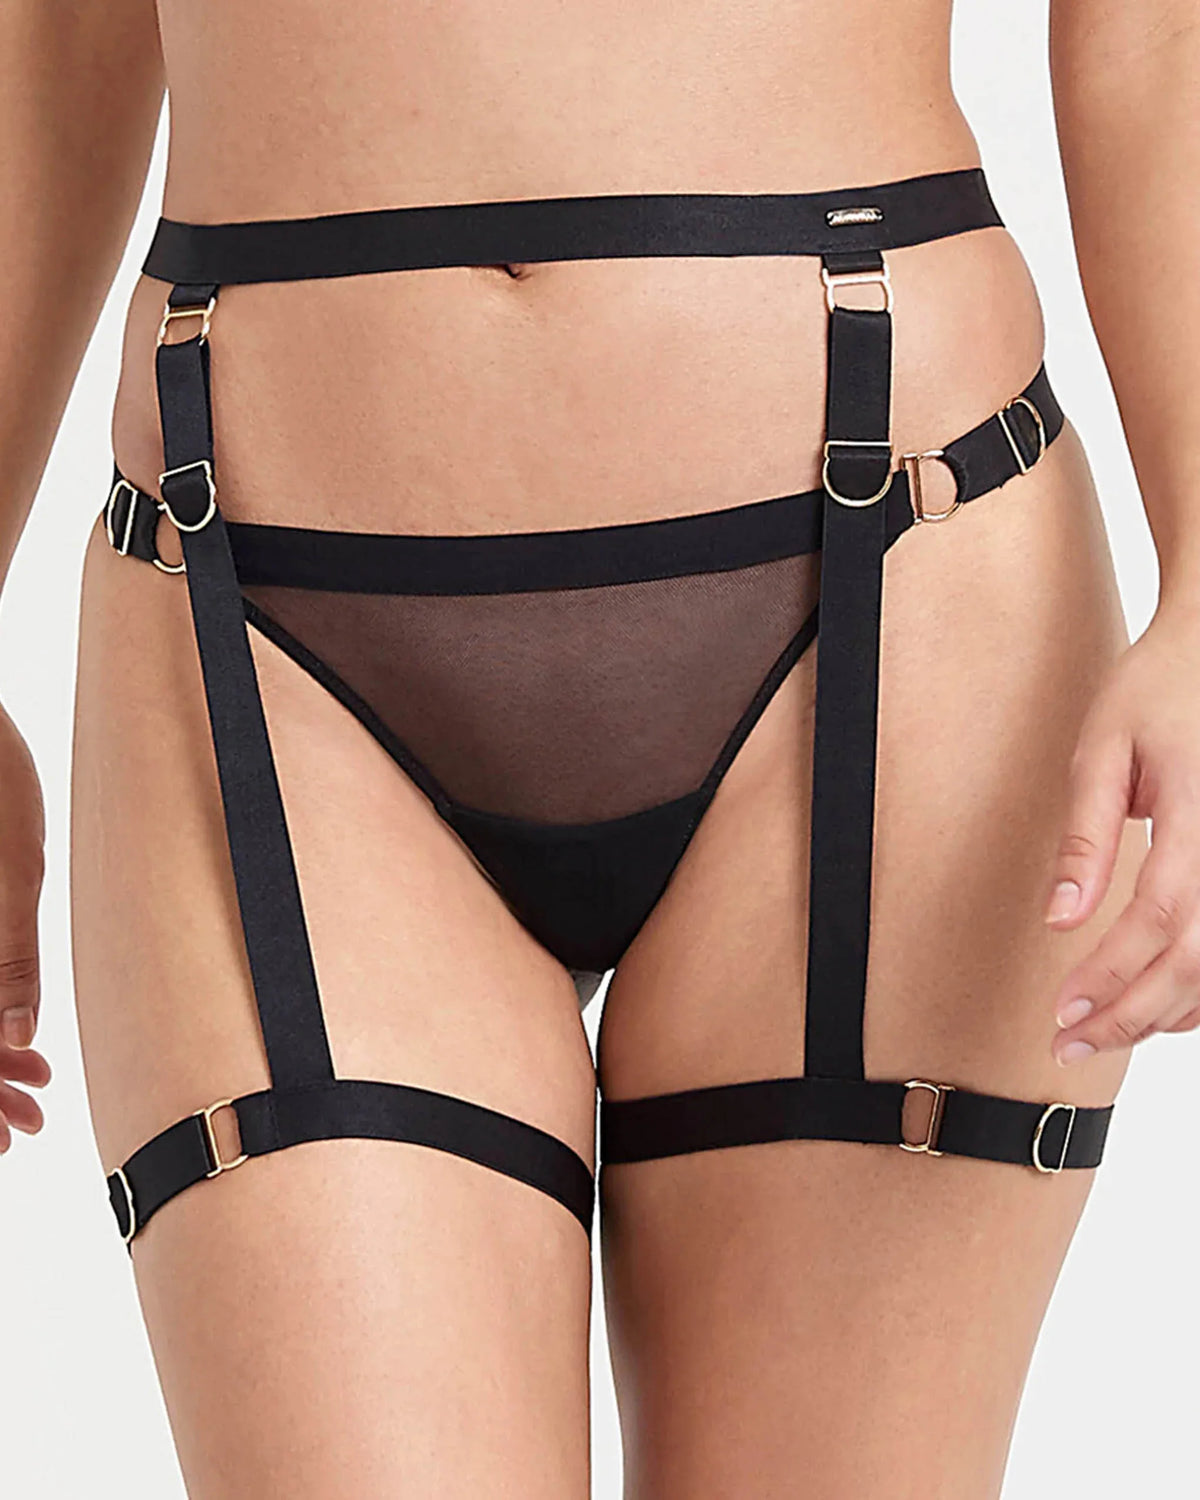 Bluebella Thea Thigh-Harness at Belle Lacet Lingerie